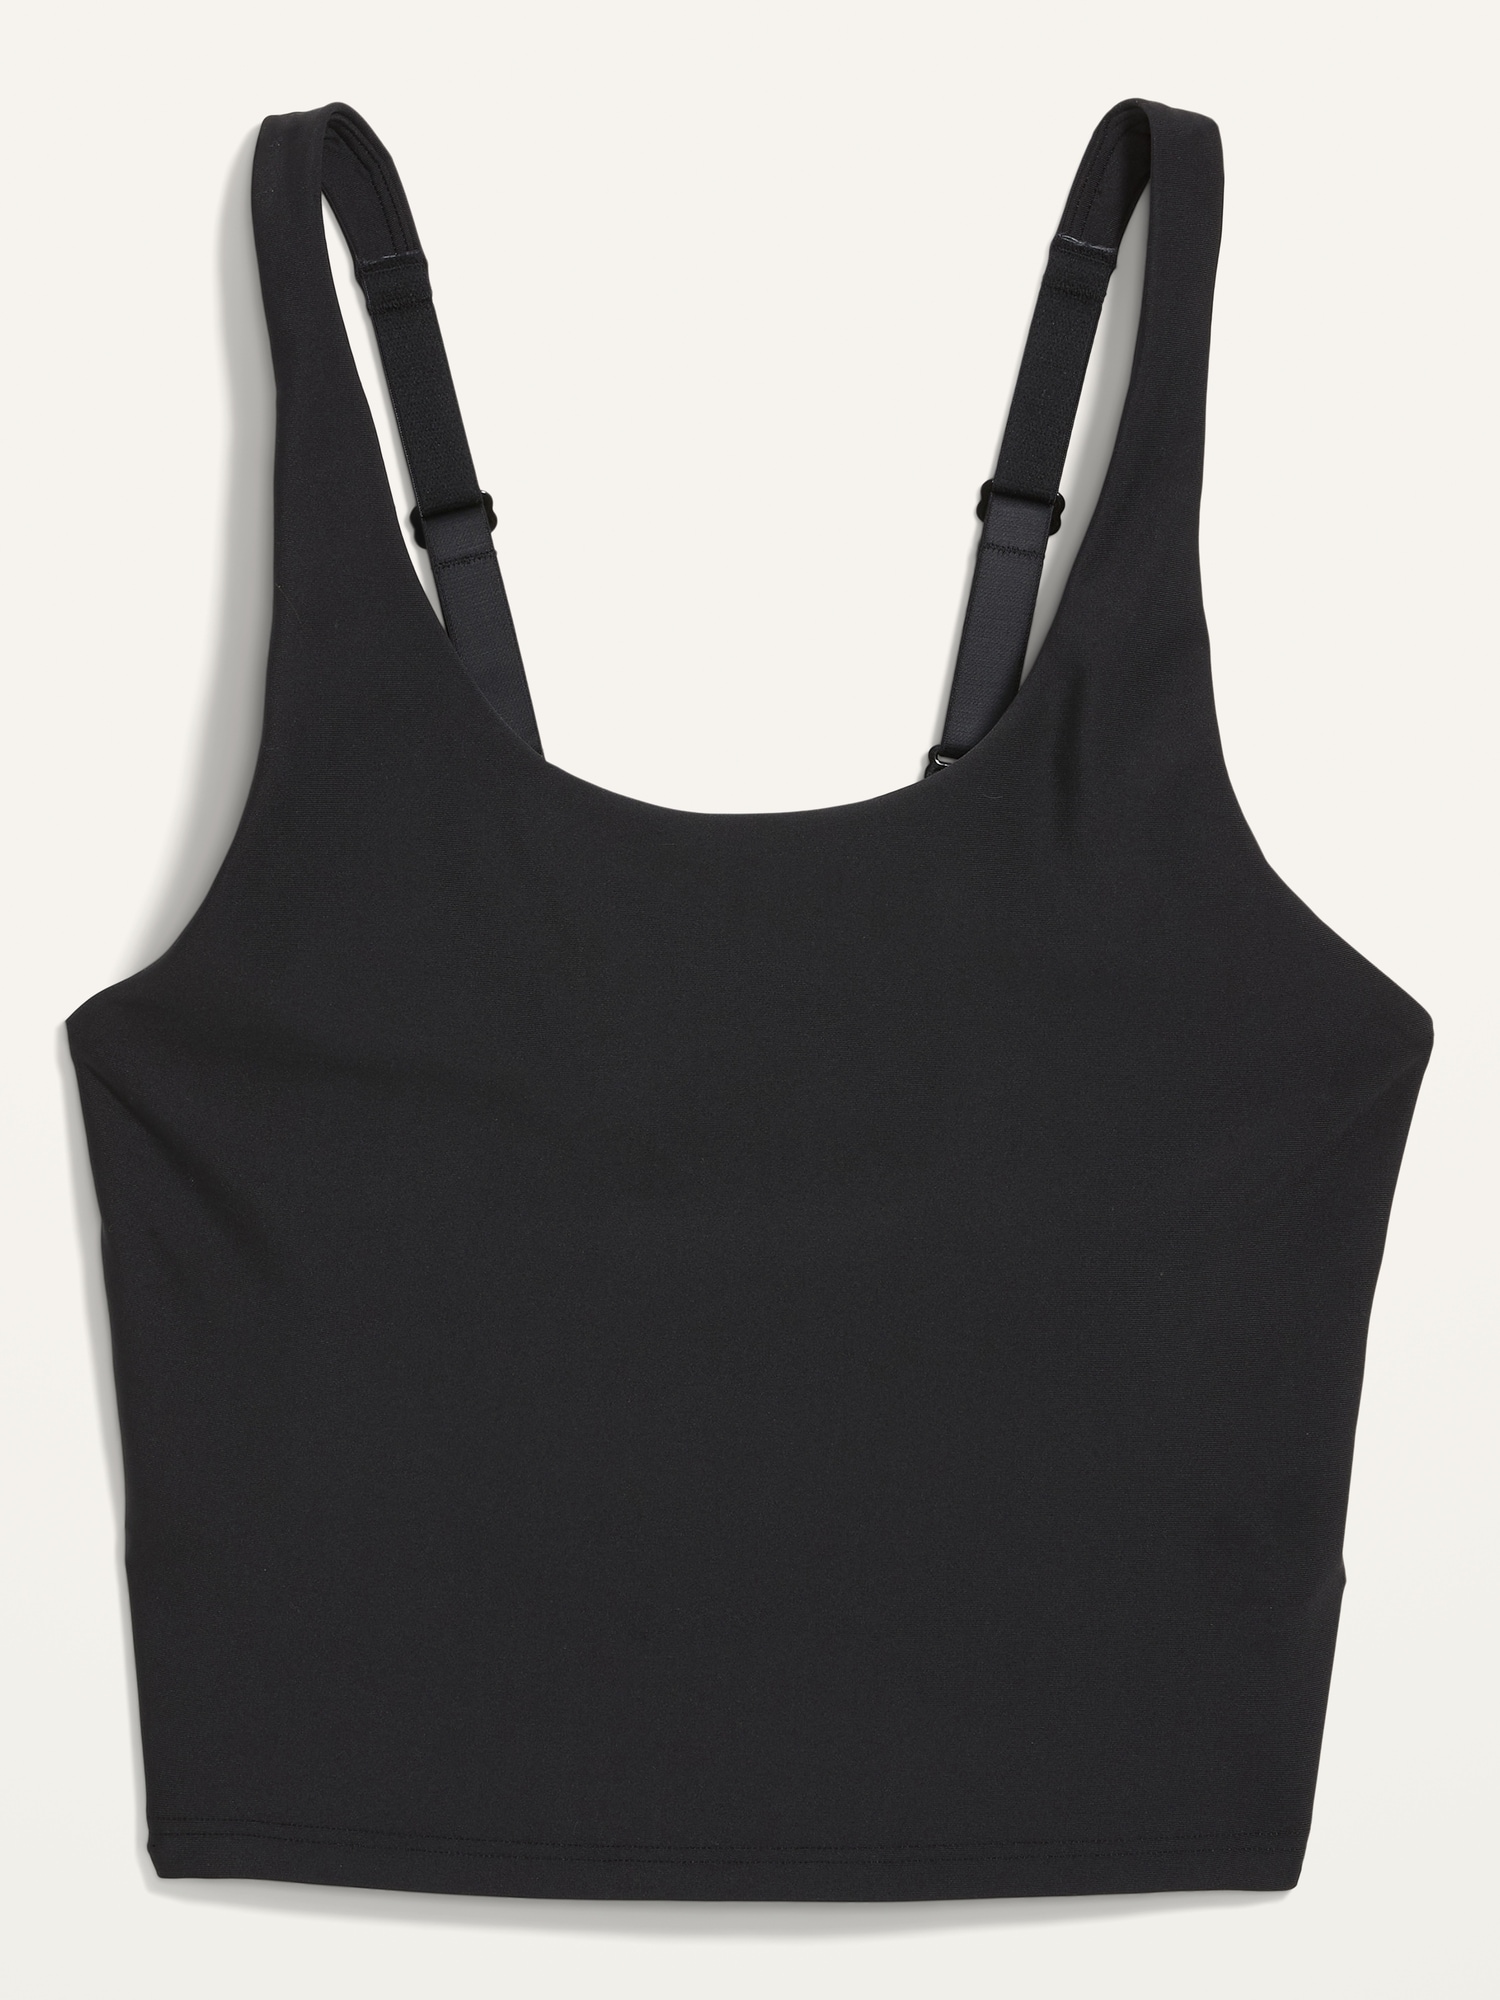 Old Navy, Tops, Nwt Black Powersoft Cropped Shelfbra Tank Top For Women  Multiple Sizes